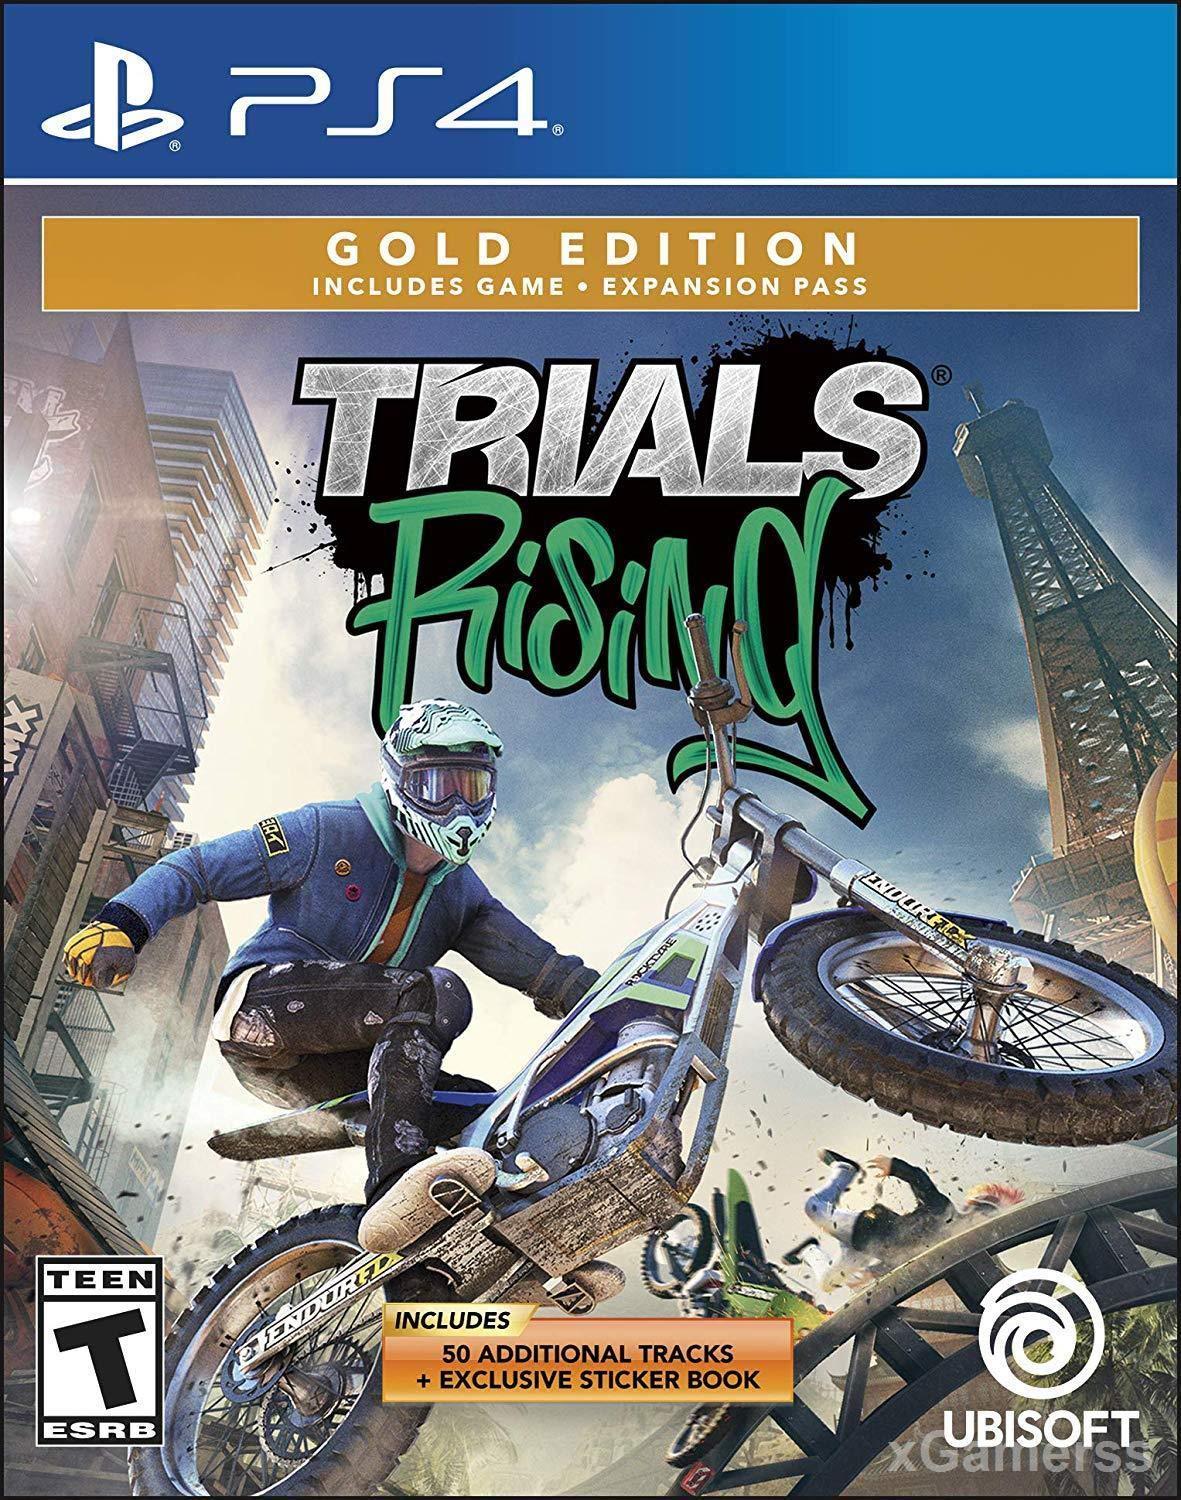 Trials Rising - you can really test your skills as a real biker